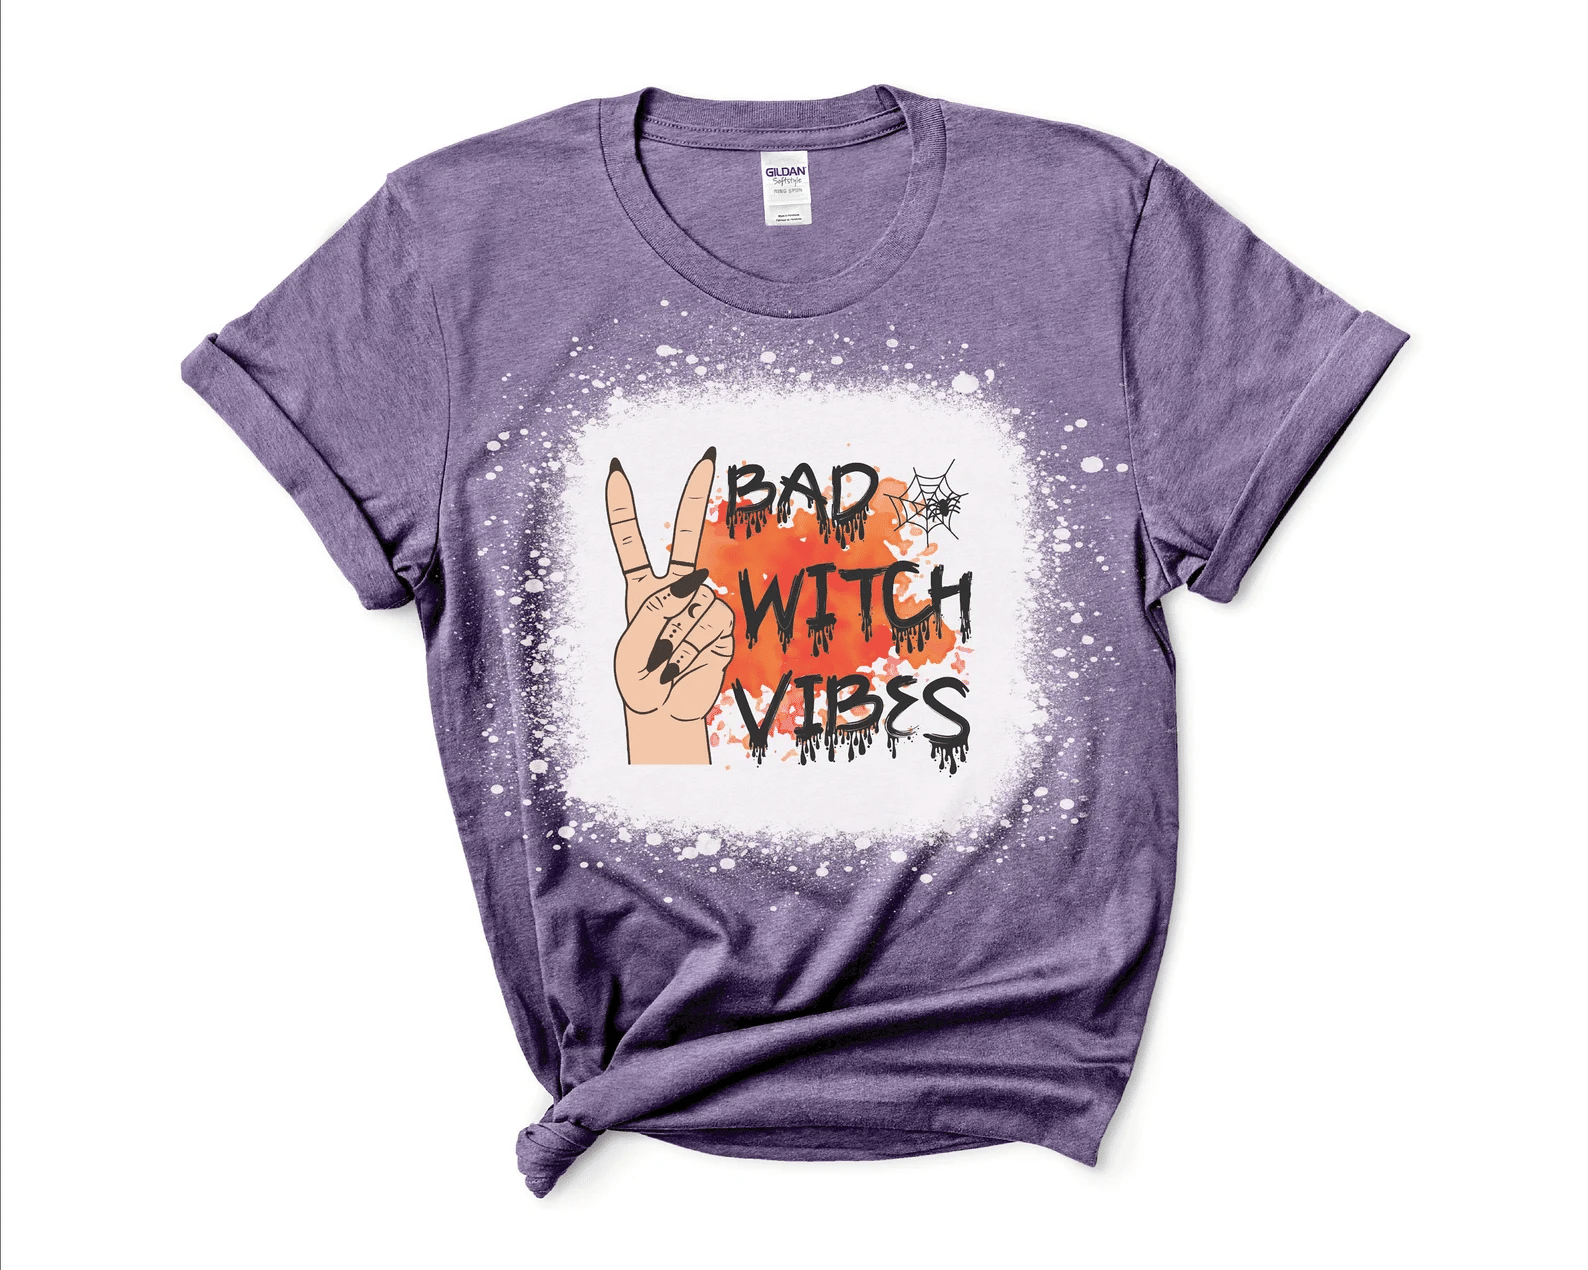 Bad Witch Vibes Halloween Bleached Shirt Style: Bleached T-Shirt, Color: Purple